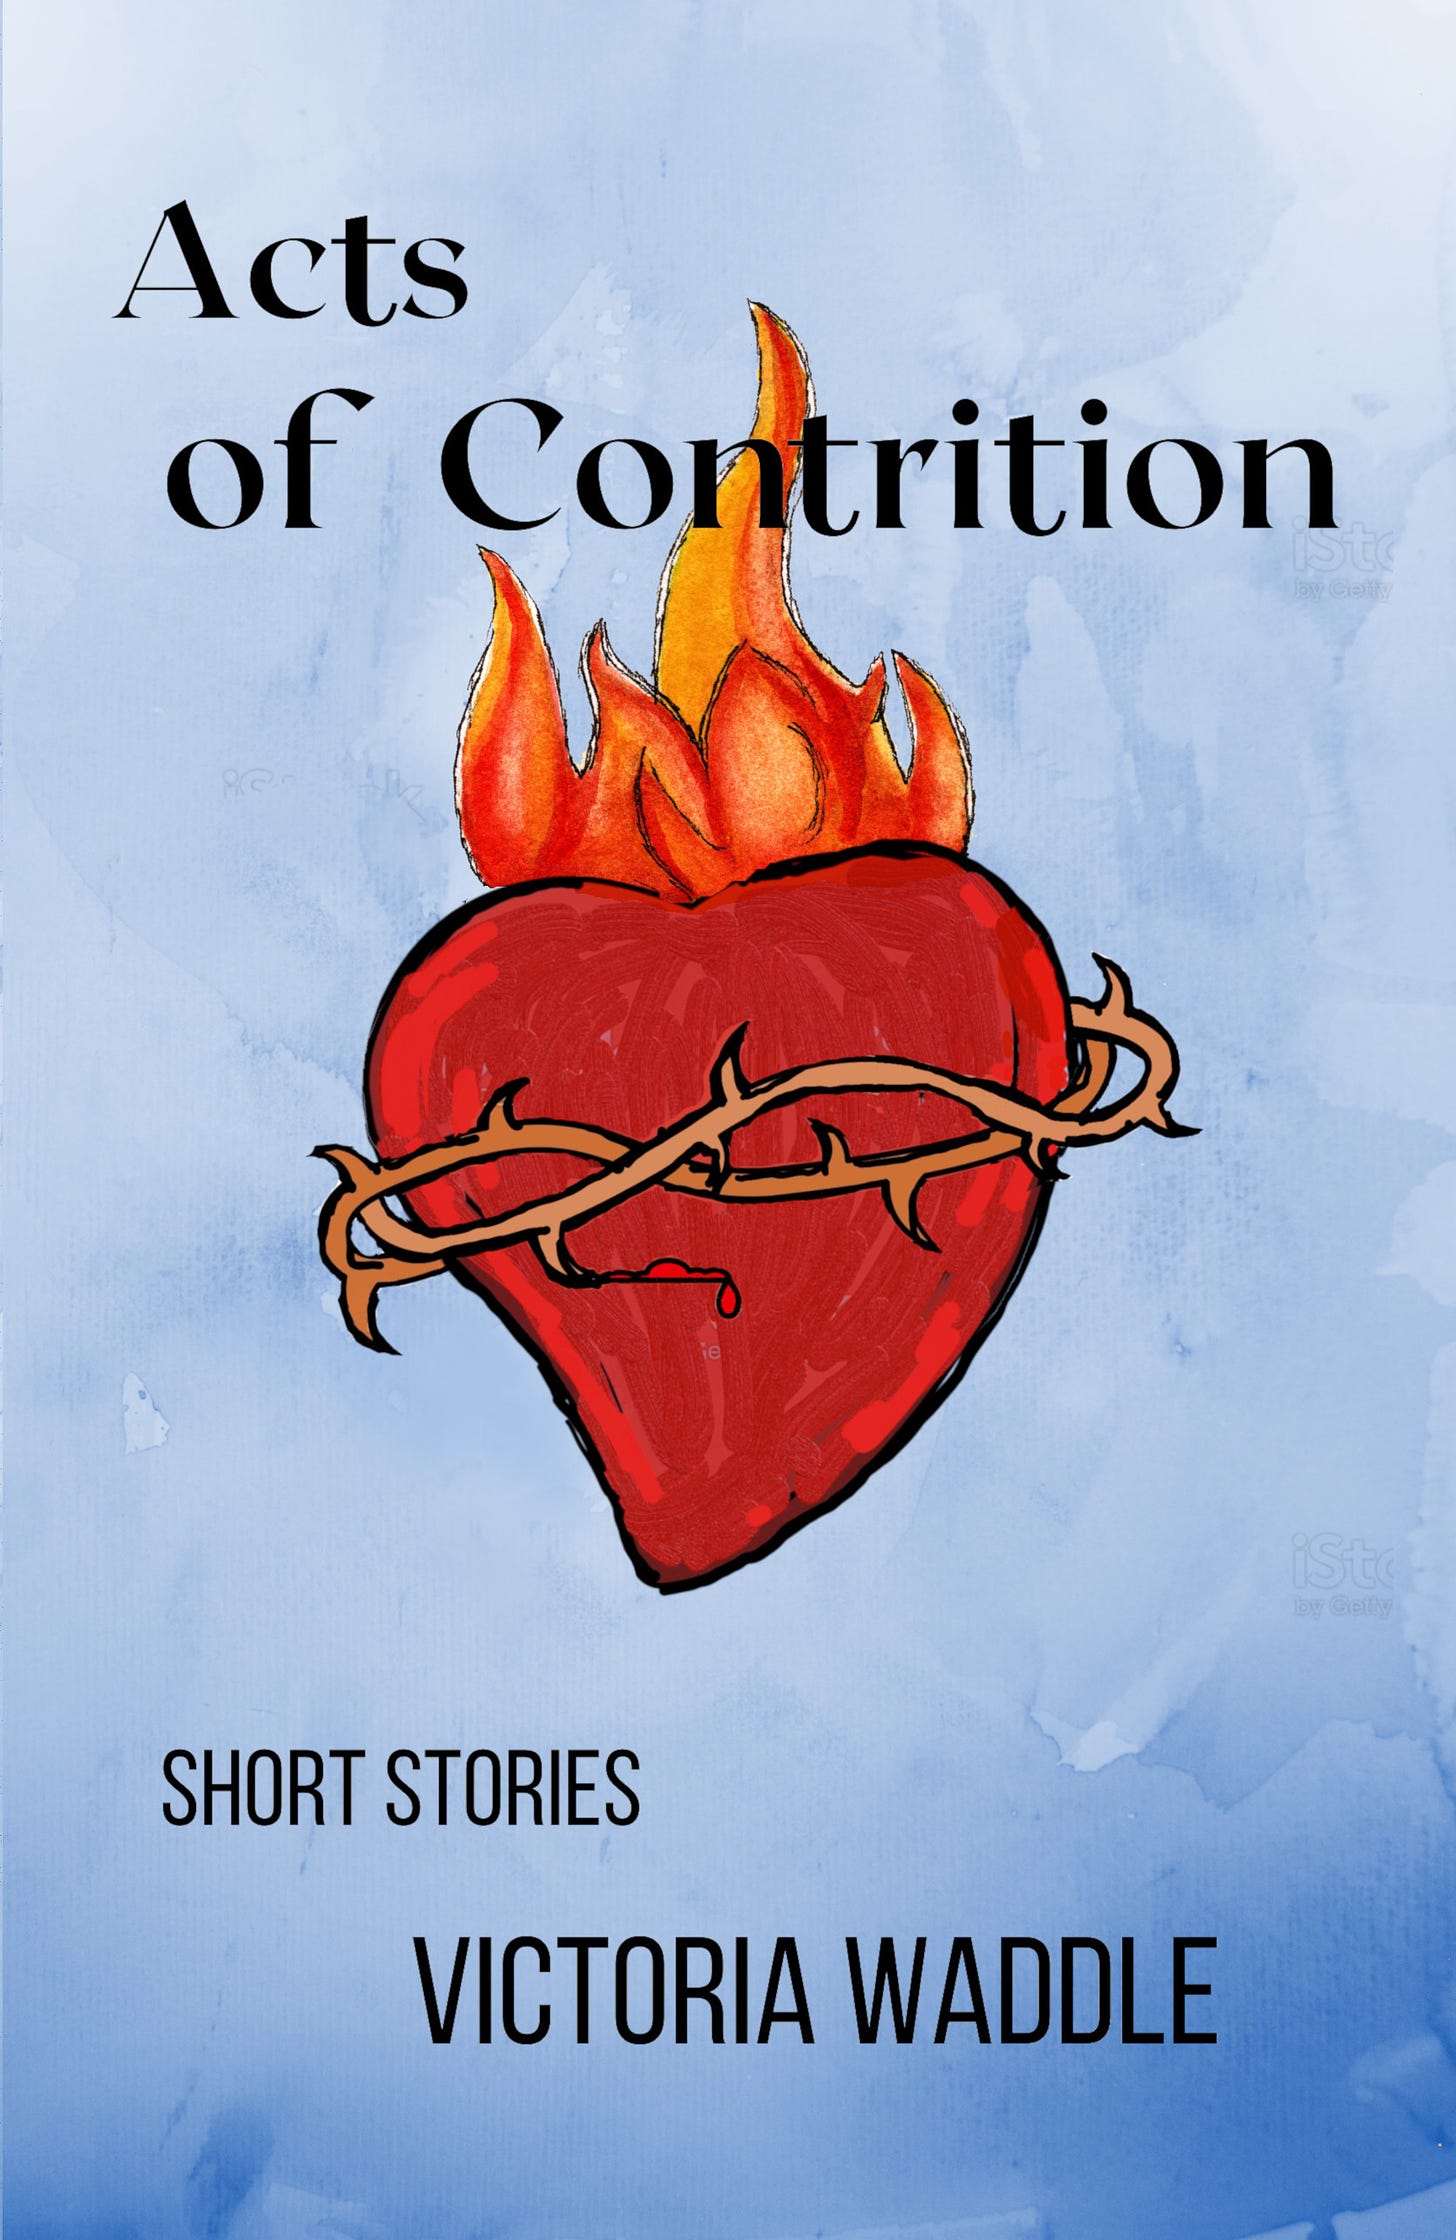 Book cover for Acts of Contrition, which includes a sacred heart.